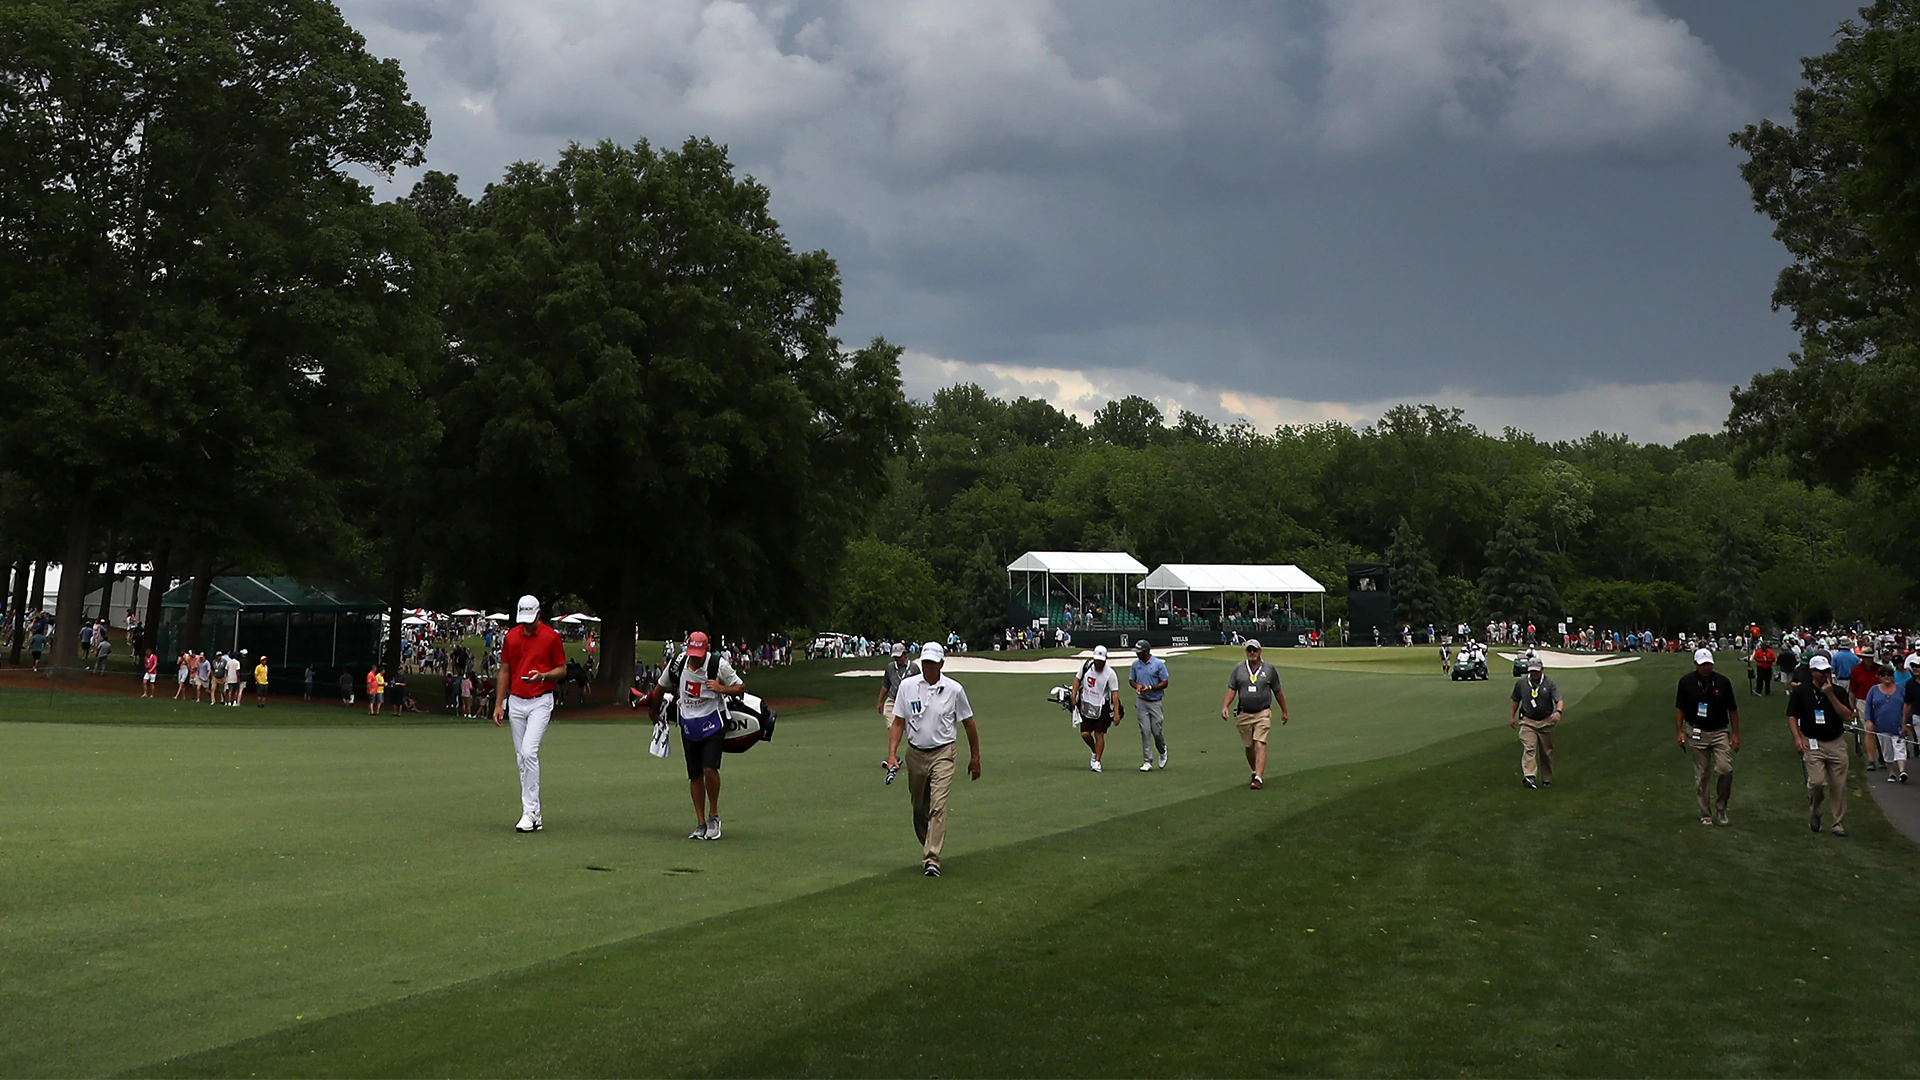 Play again halted for weather at Wells Fargo, resumes just more than hour later